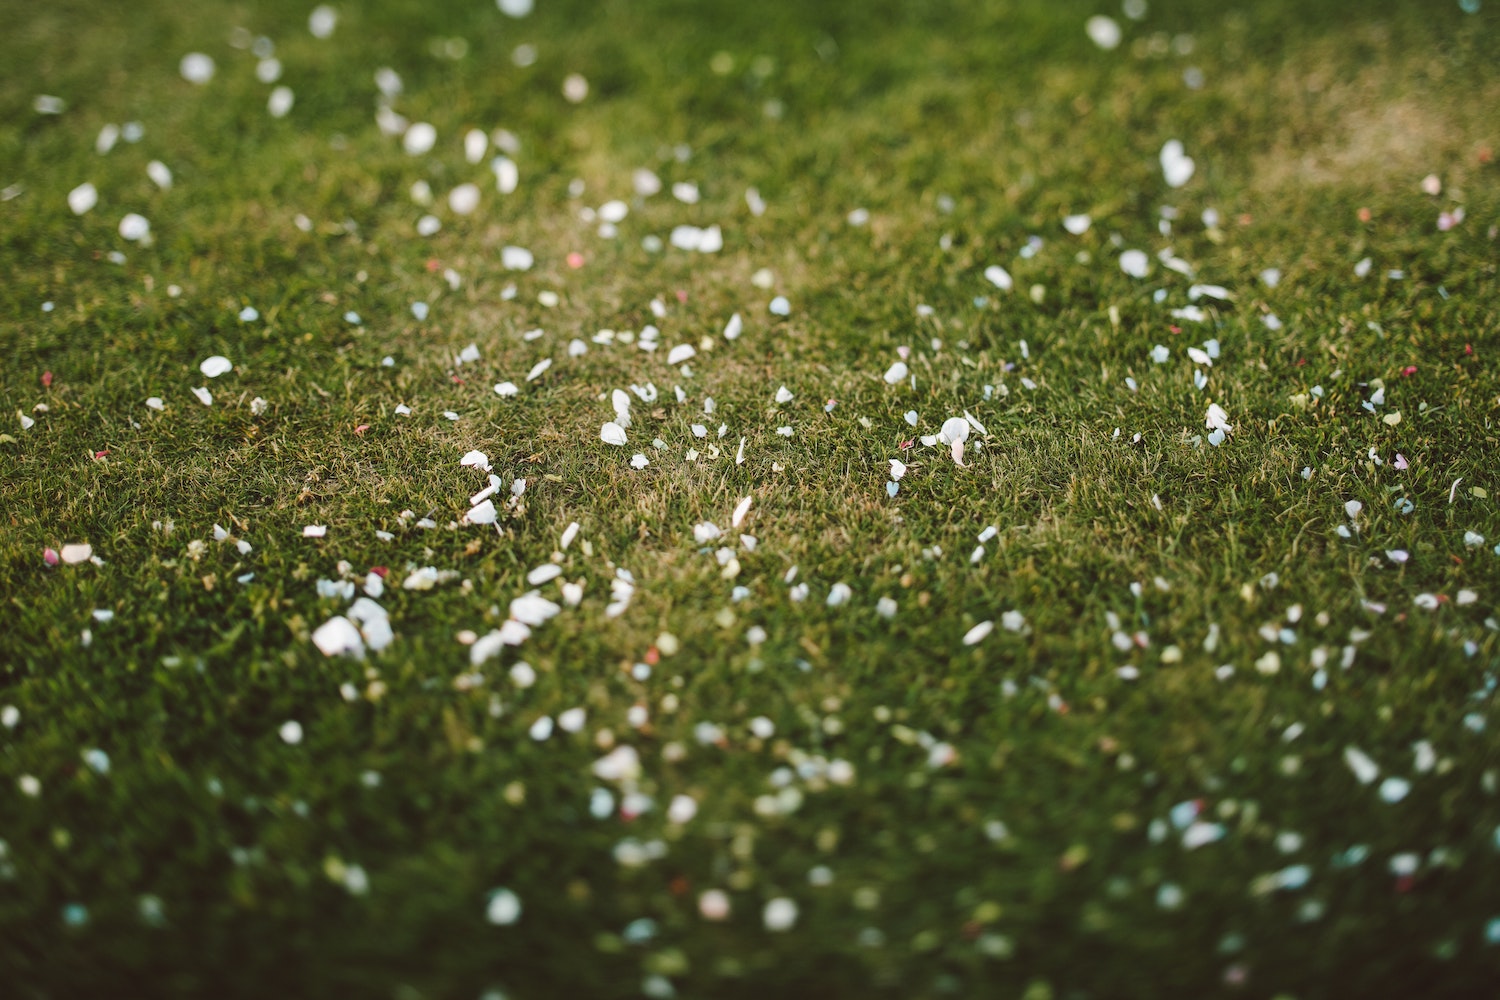 Eco-friendly confetti spread across the grass - image by Jason Wong from Pexels